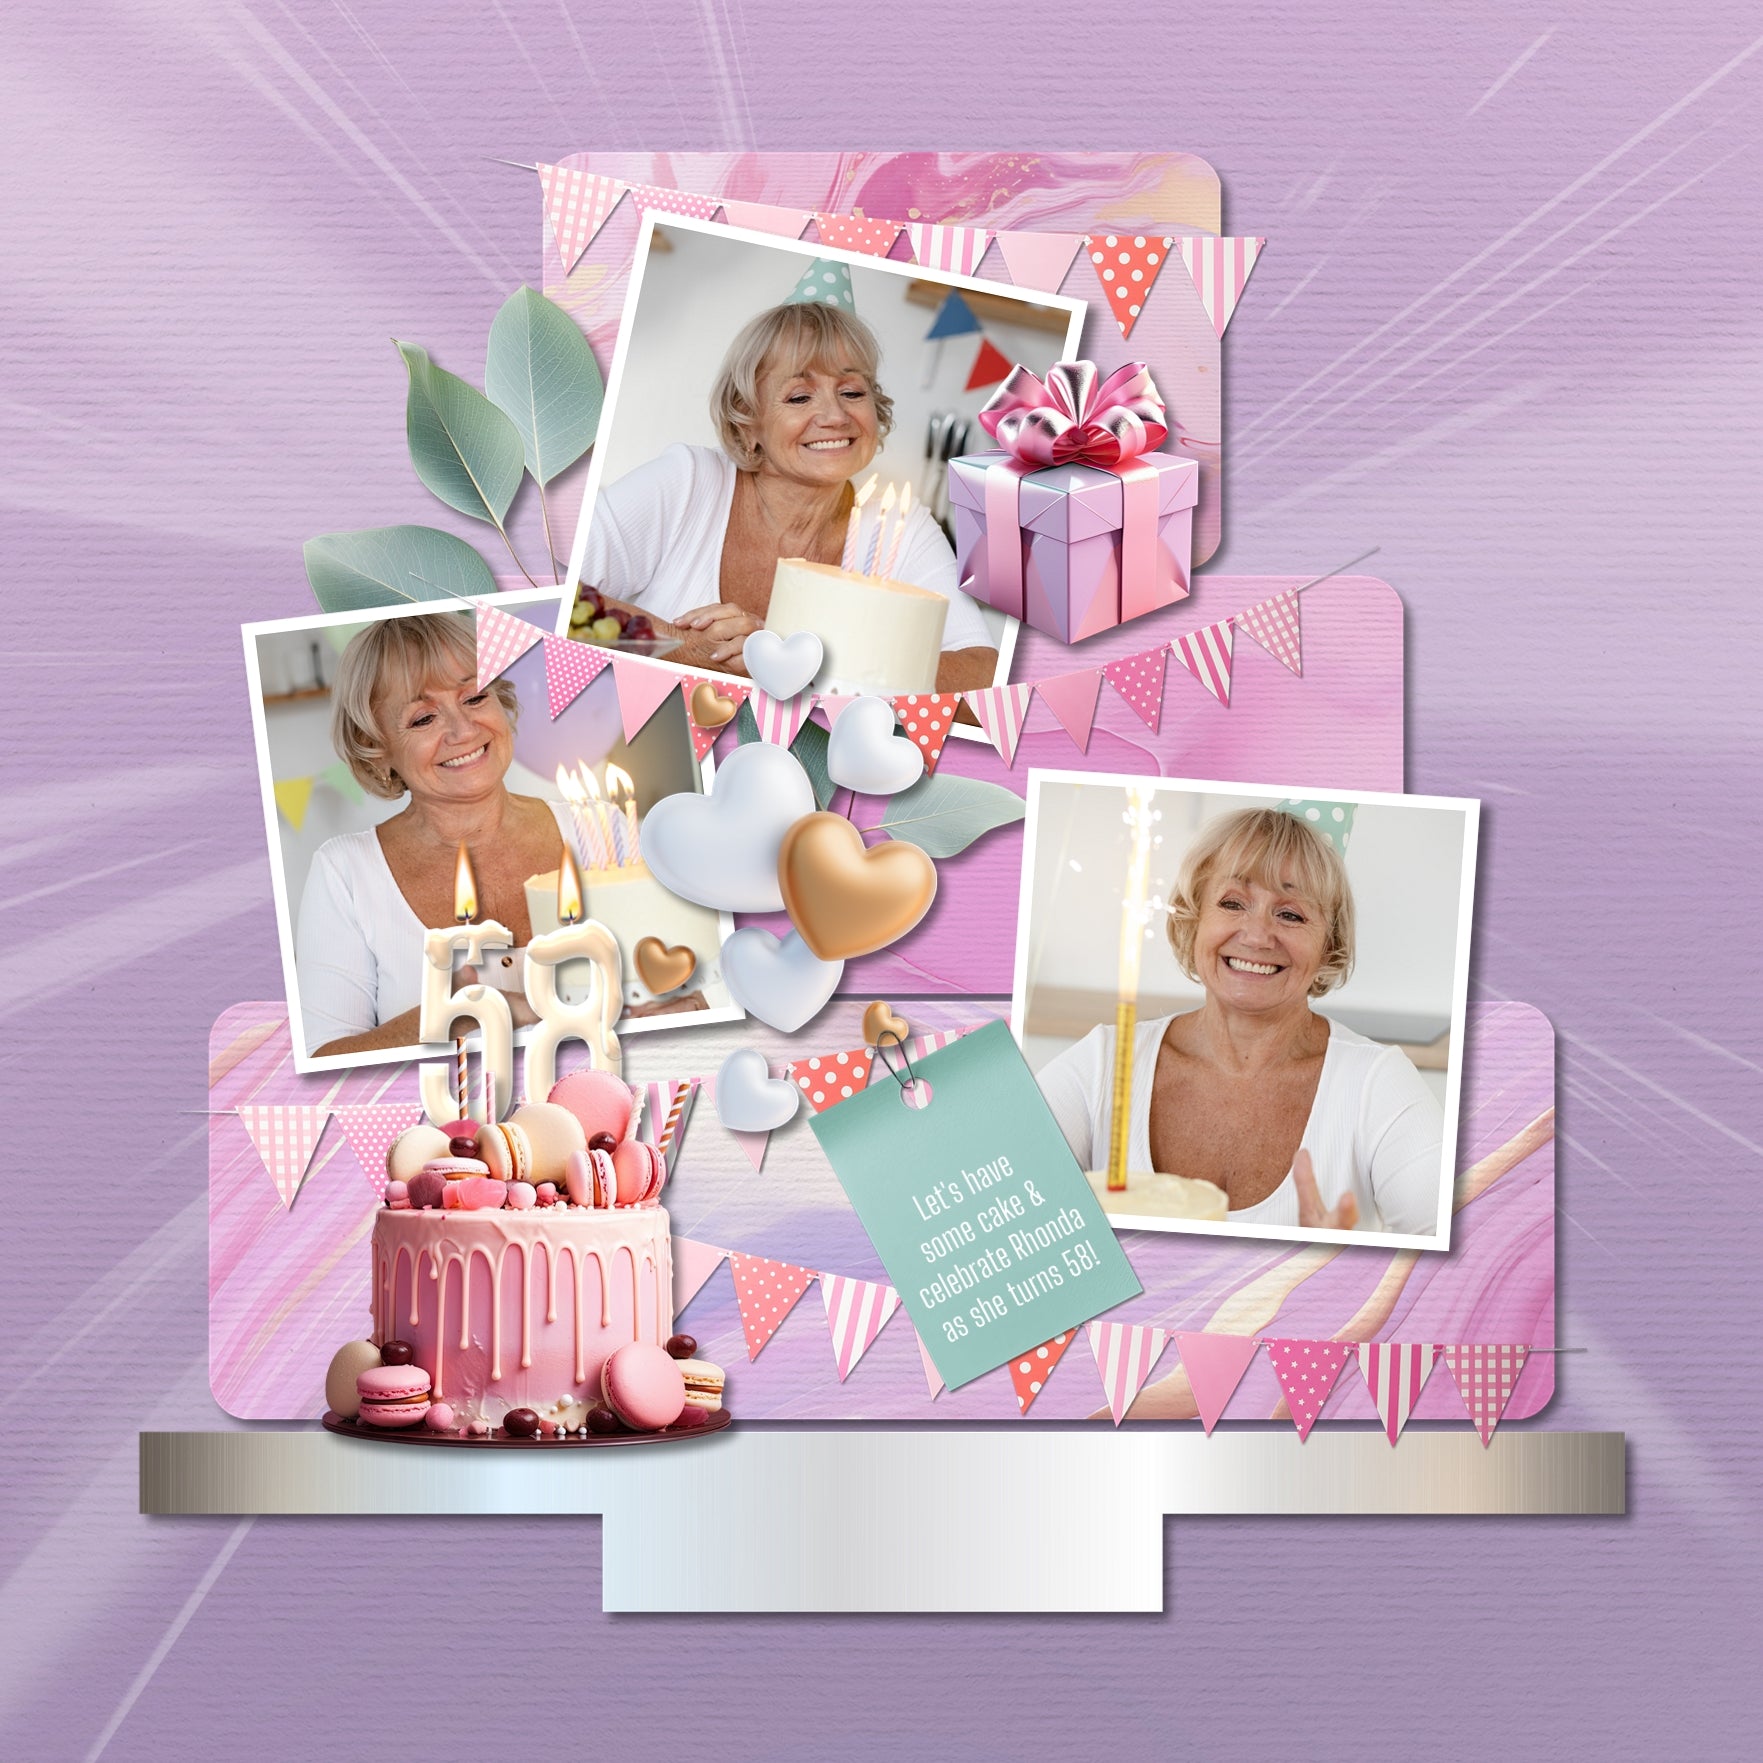 Enjoy the memories created with your girlfriends as you celebrate your birthdays together. This fun and feminine digital scrapbooking marbled papers kit by Lucky Girl Creative Digital Art will help you tell your story and bring a smile to your face as you recall your favorite times together. Papers include marbled color shades of pink, purple, blue, and green.